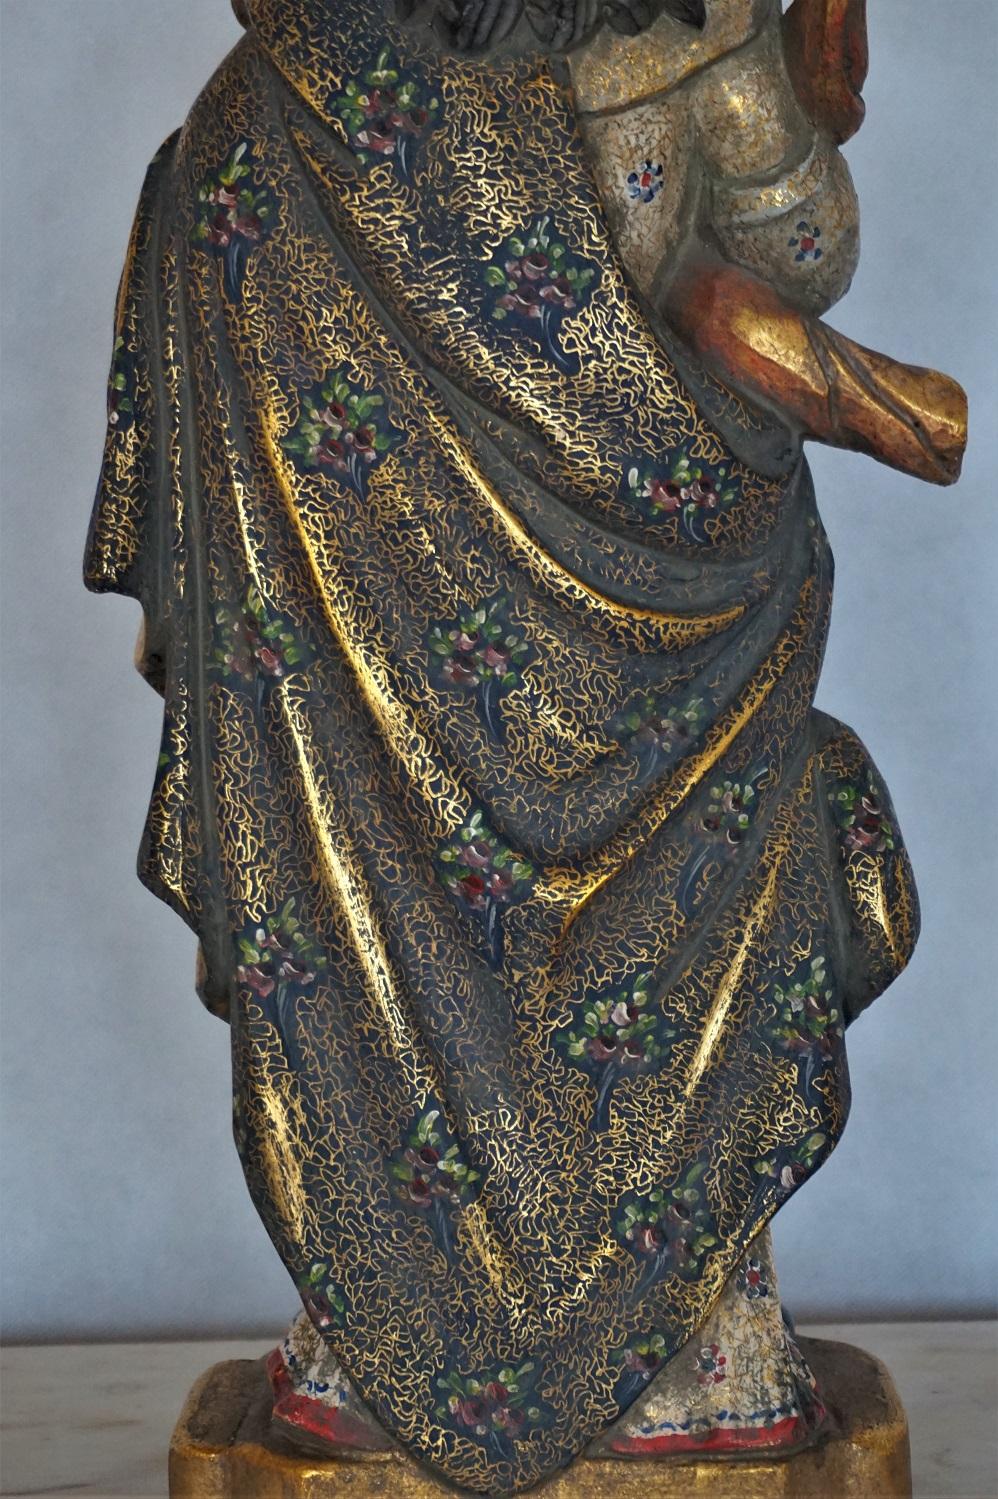 Madonna Carved Wood Sculpture Gold Leaf and Polychrome, Spain, Mid-18th Century For Sale 8